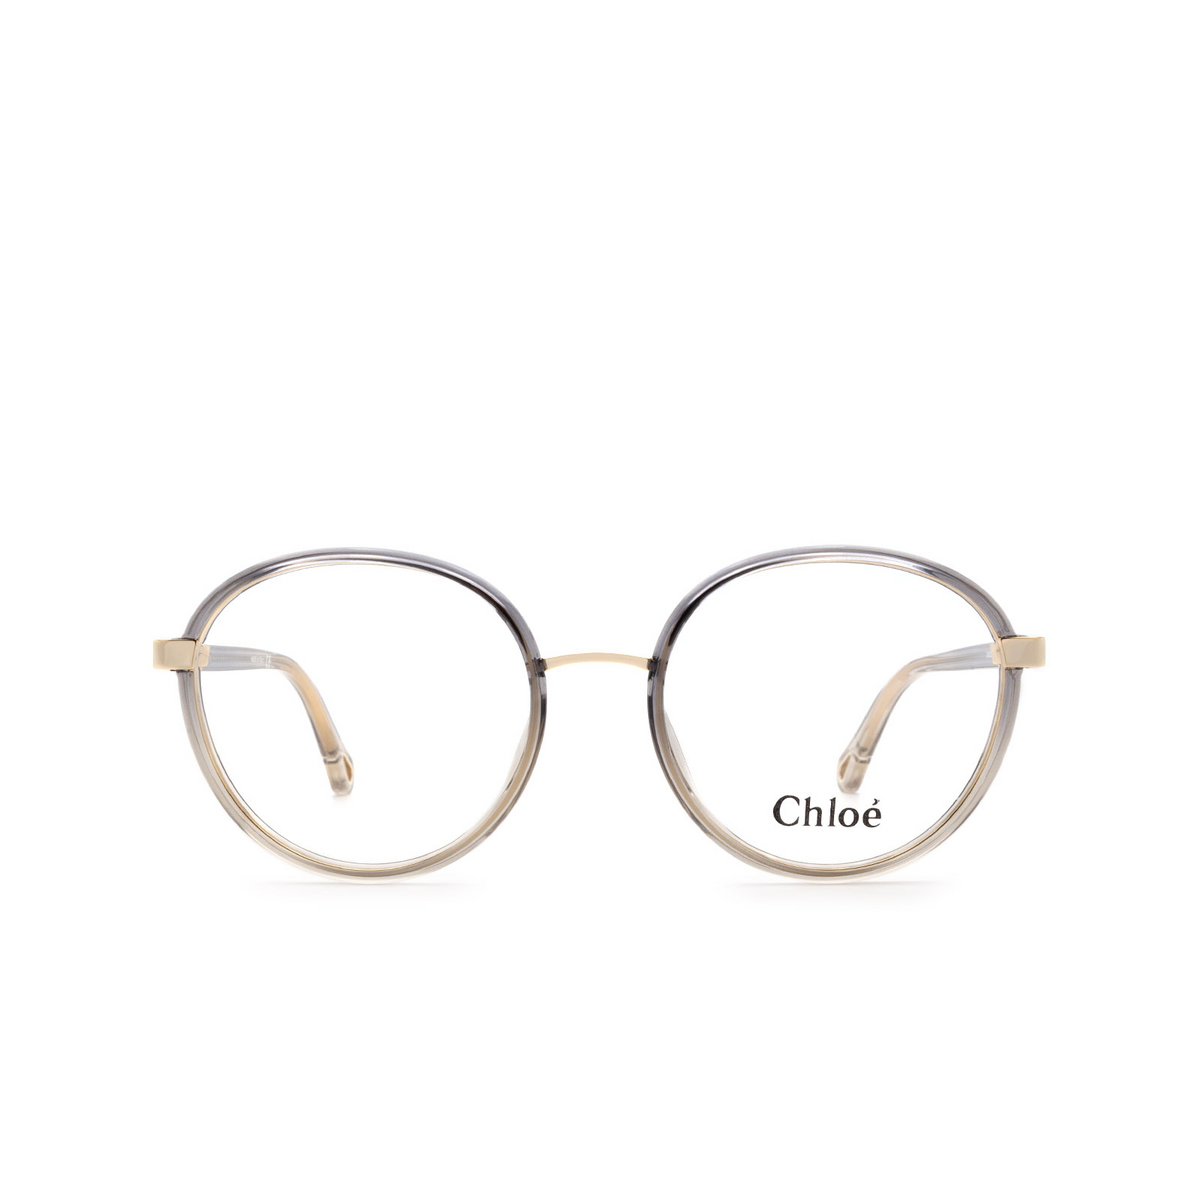 Chloé® Round Eyeglasses: CH0033O color Grey 002 - front view.